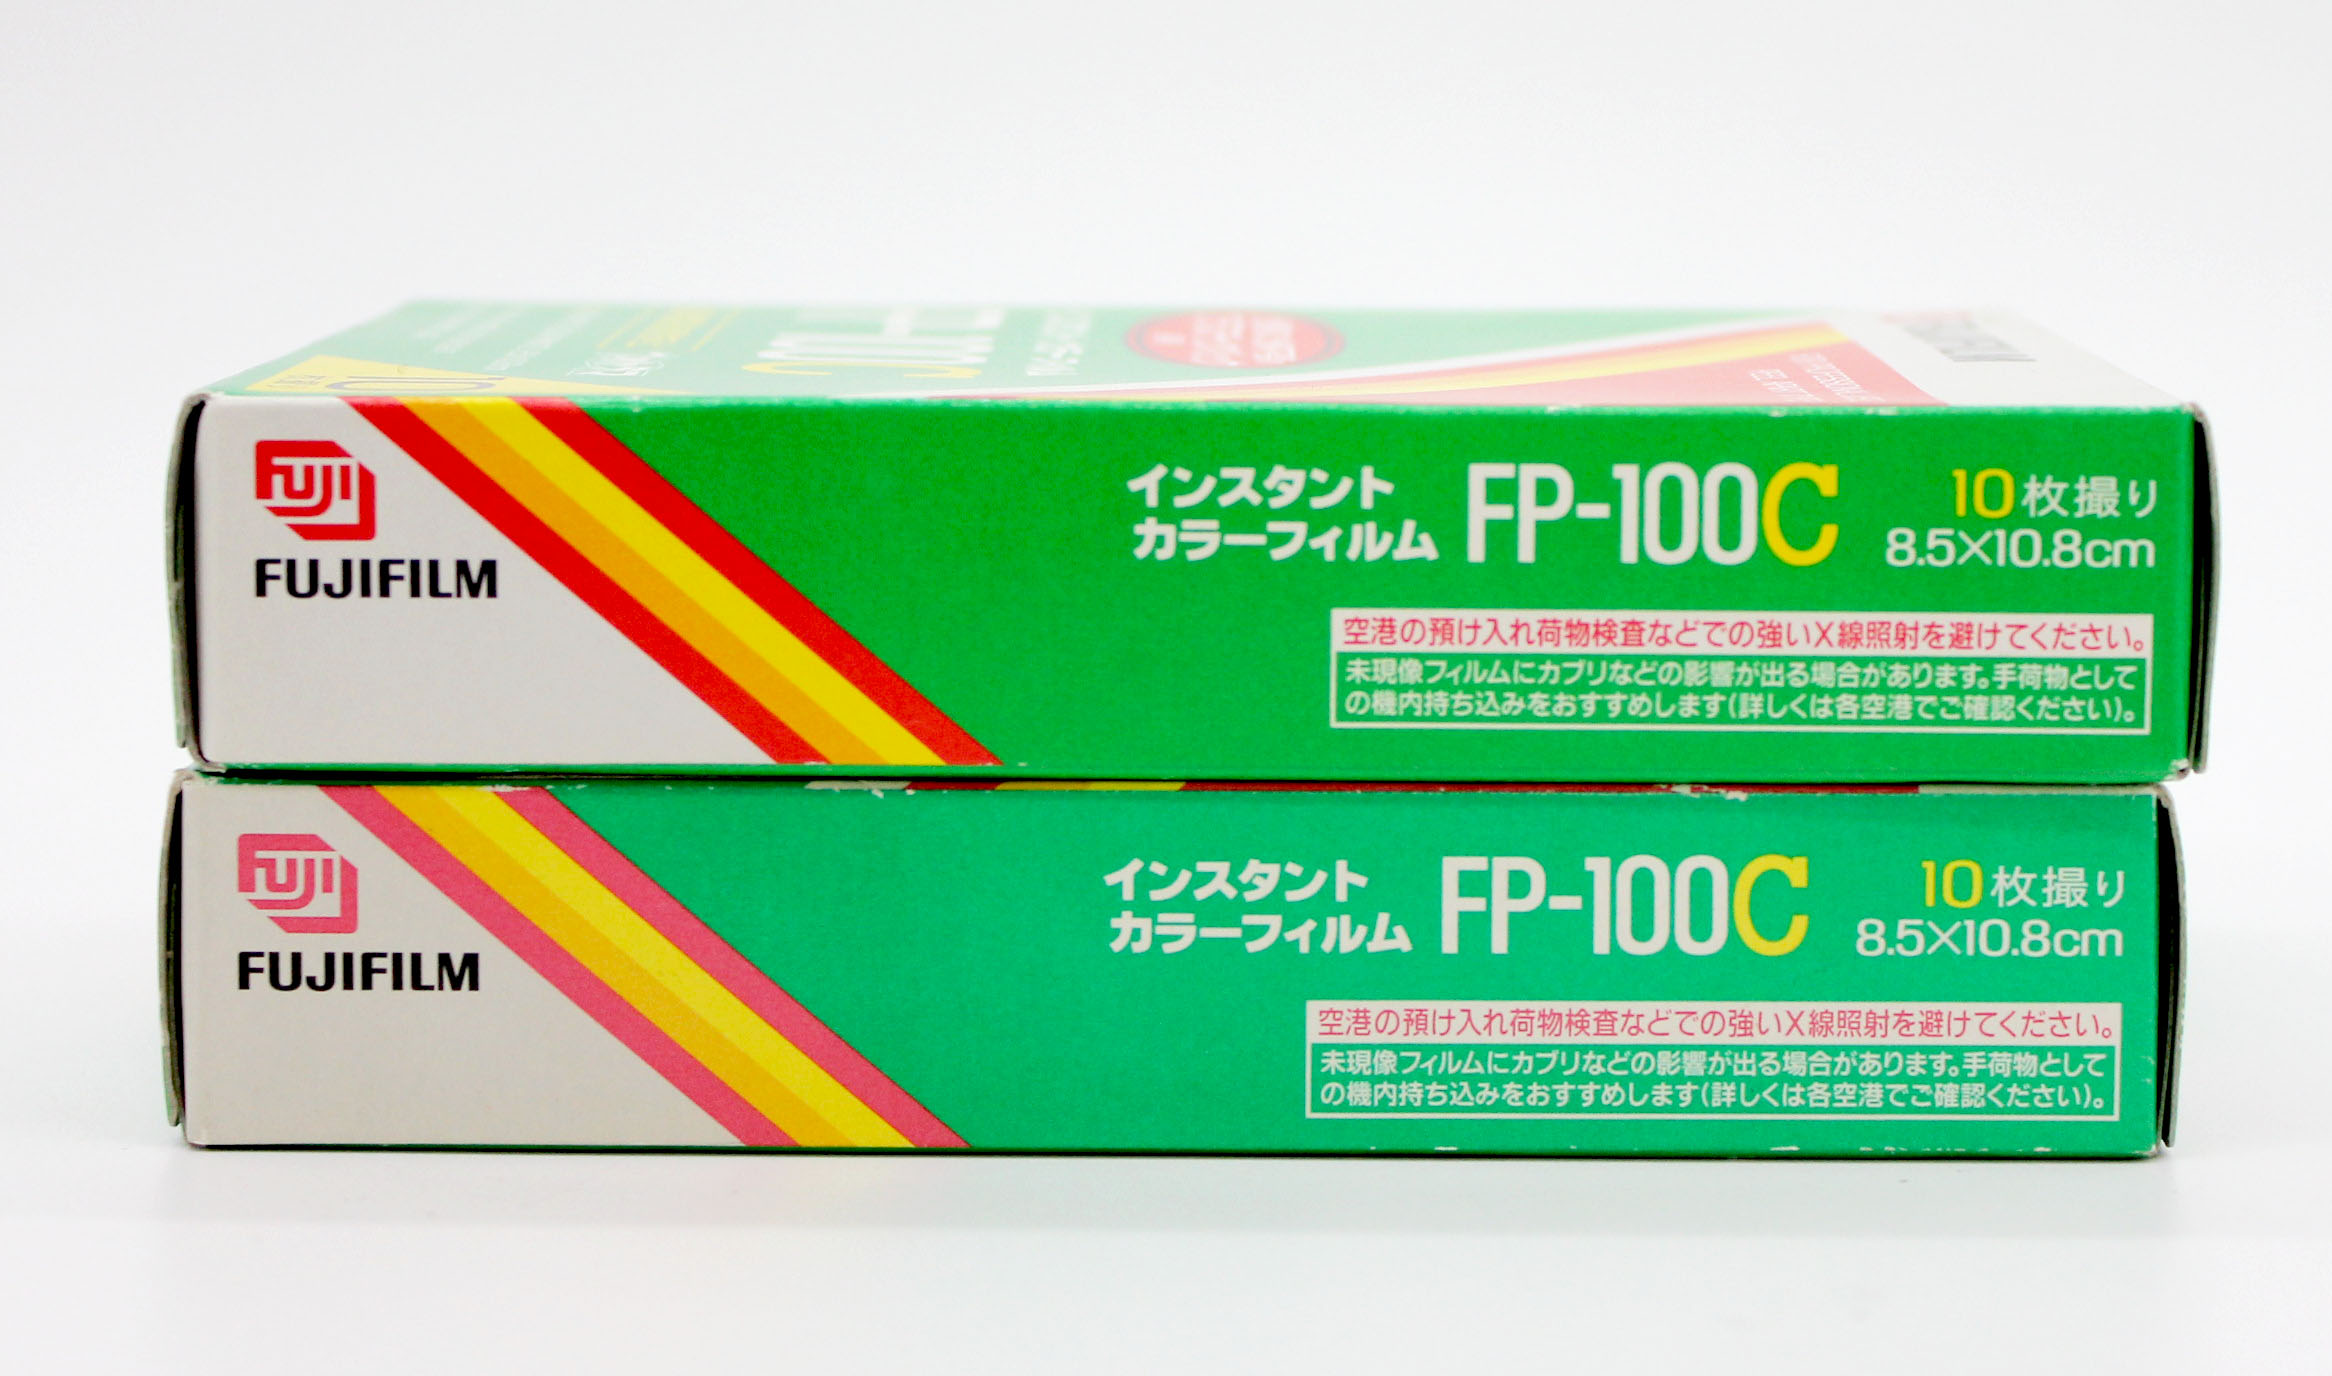  Fujifilm FP-100C Instant Color Film Set of 2 (Expired) from Japan Photo 6